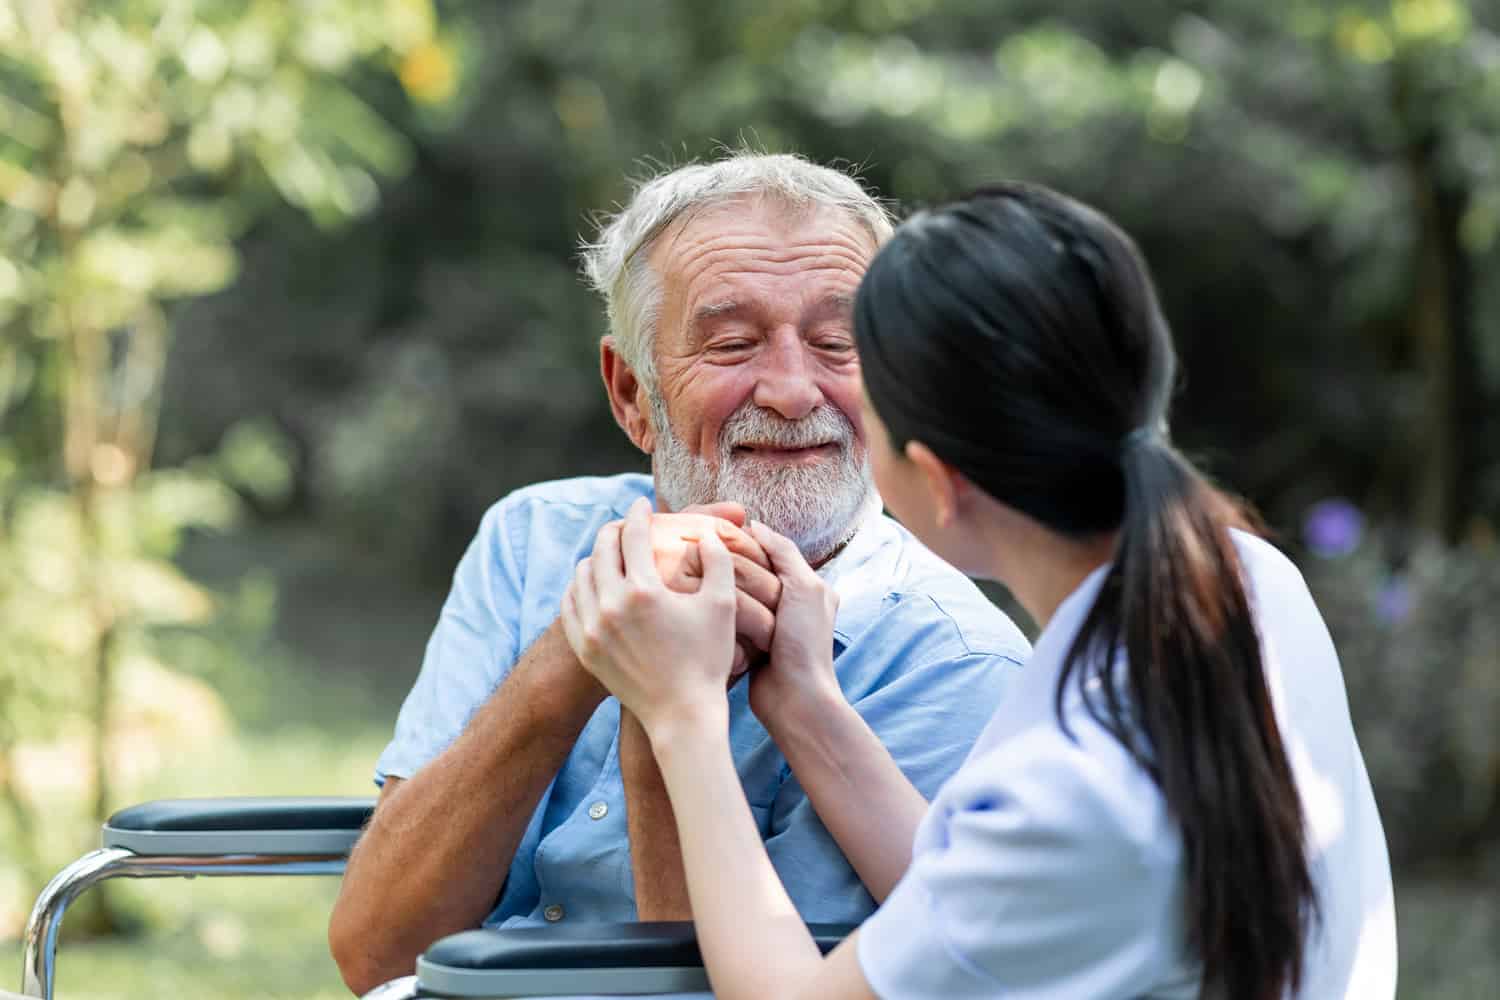 A tender moment in daily life help: a caregiver and an elderly man in a wheelchair, sharing a warm and comforting hand-hold in a lush park setting.